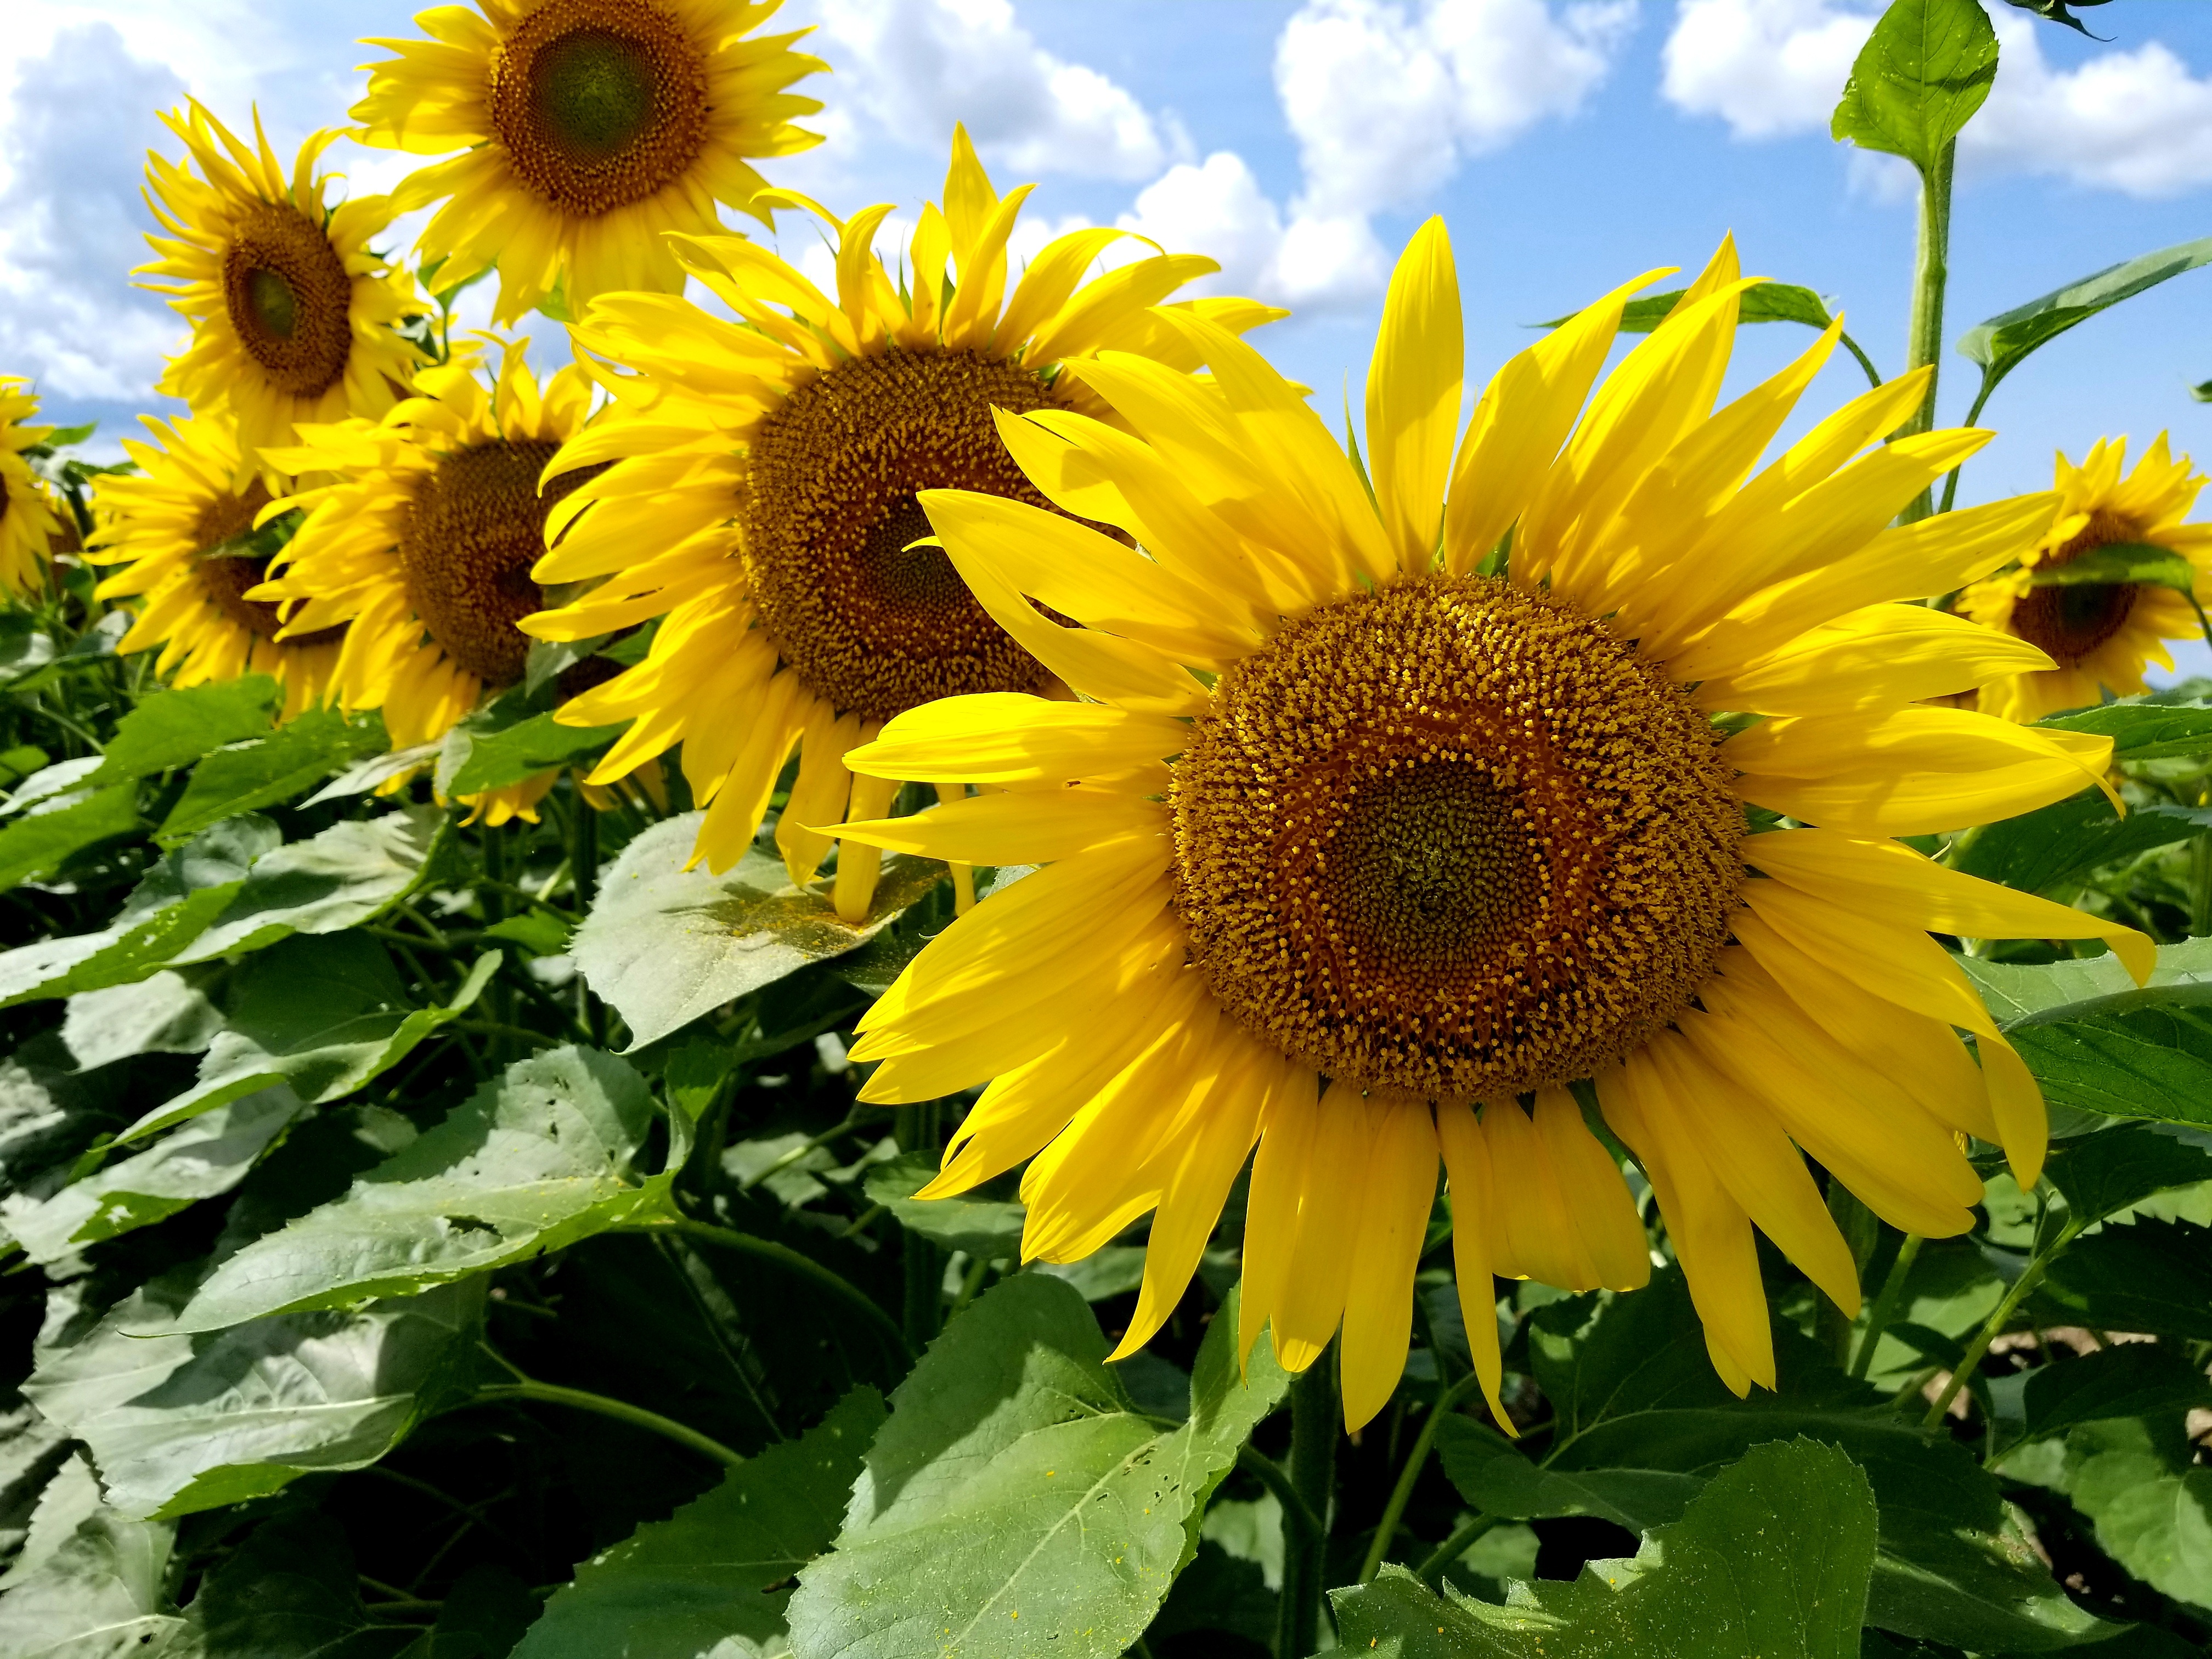 General 4032x3024 sunflowers nature flowers plants clouds